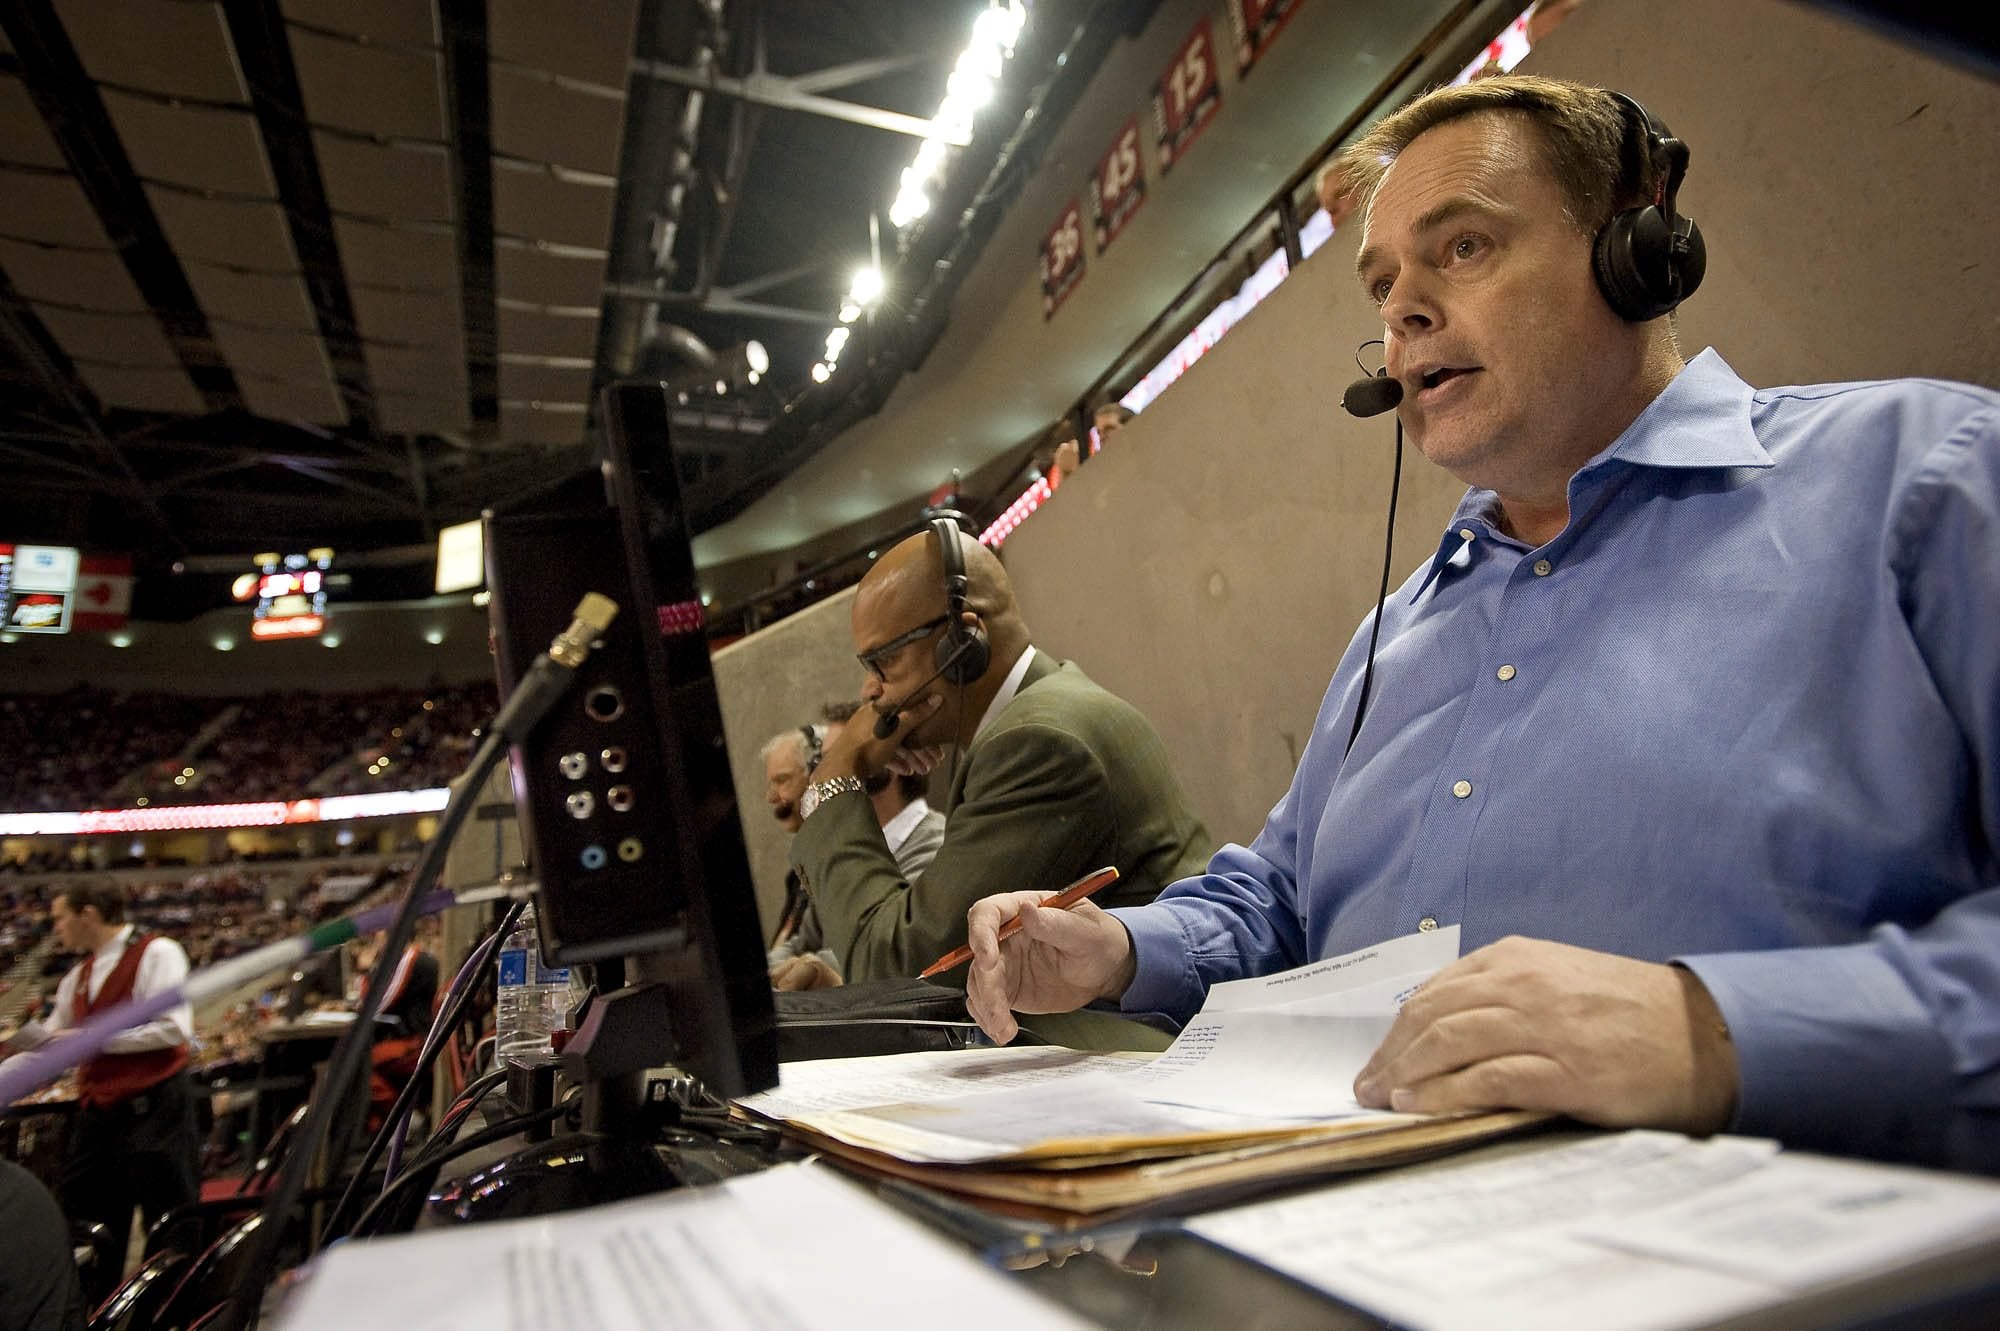 Blazers radio play-by-play man Brian Wheeler is in his 14th season as voice of the team and 28th year as a broadcaster.